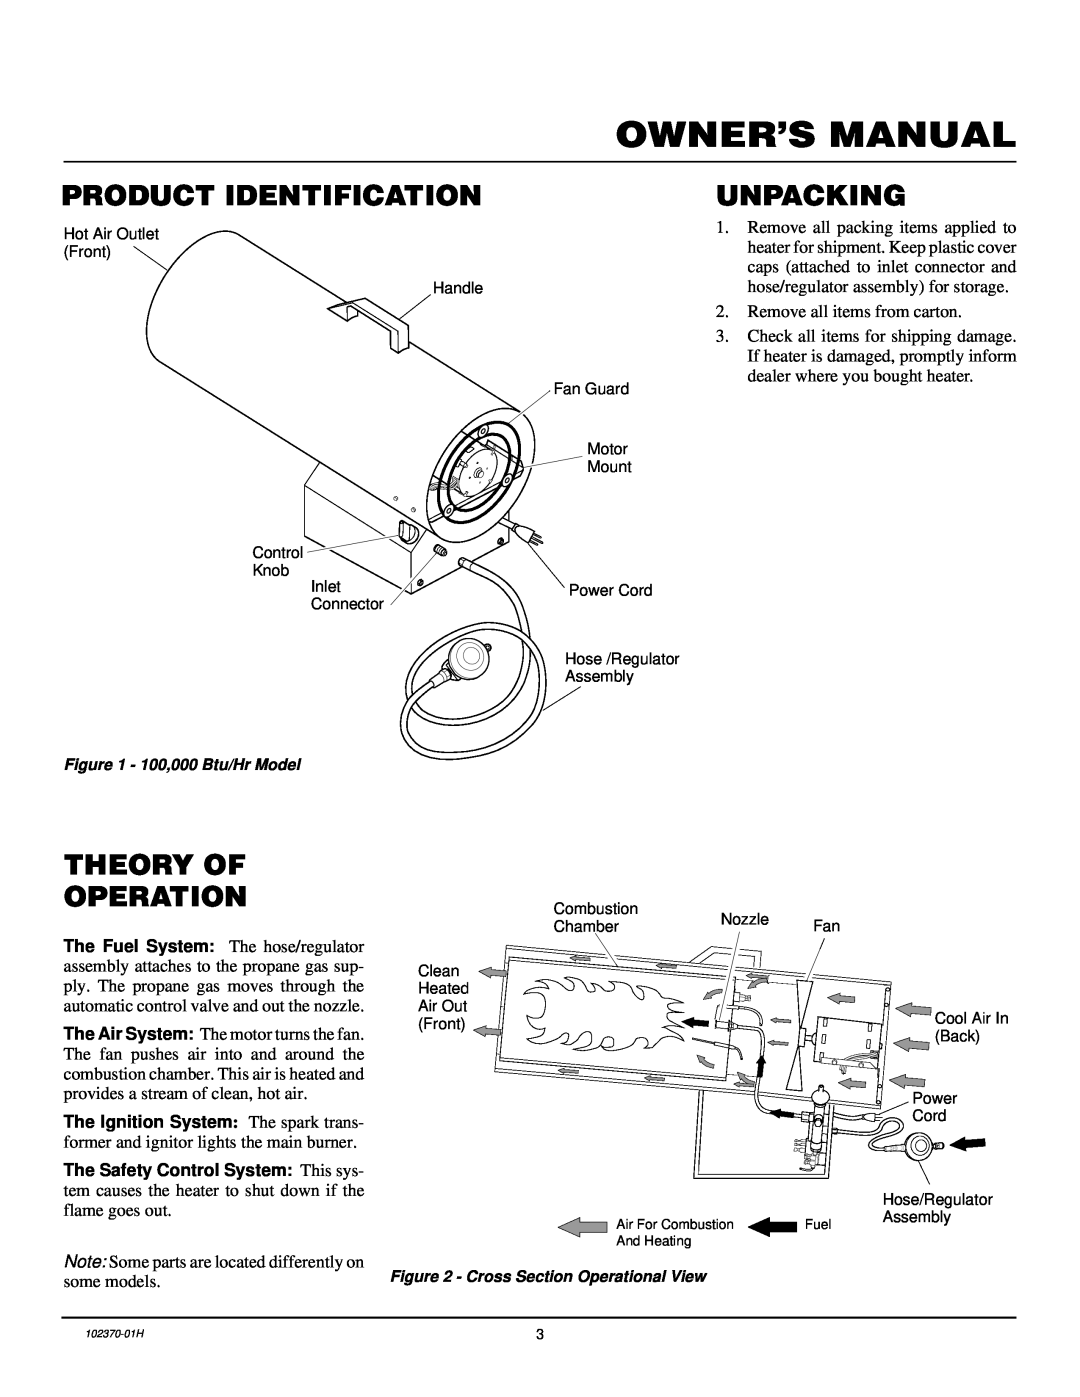 Desa PROPANE CONSTRUCTION HEATERS owner manual Product Identification, Unpacking, Theory Of Operation 